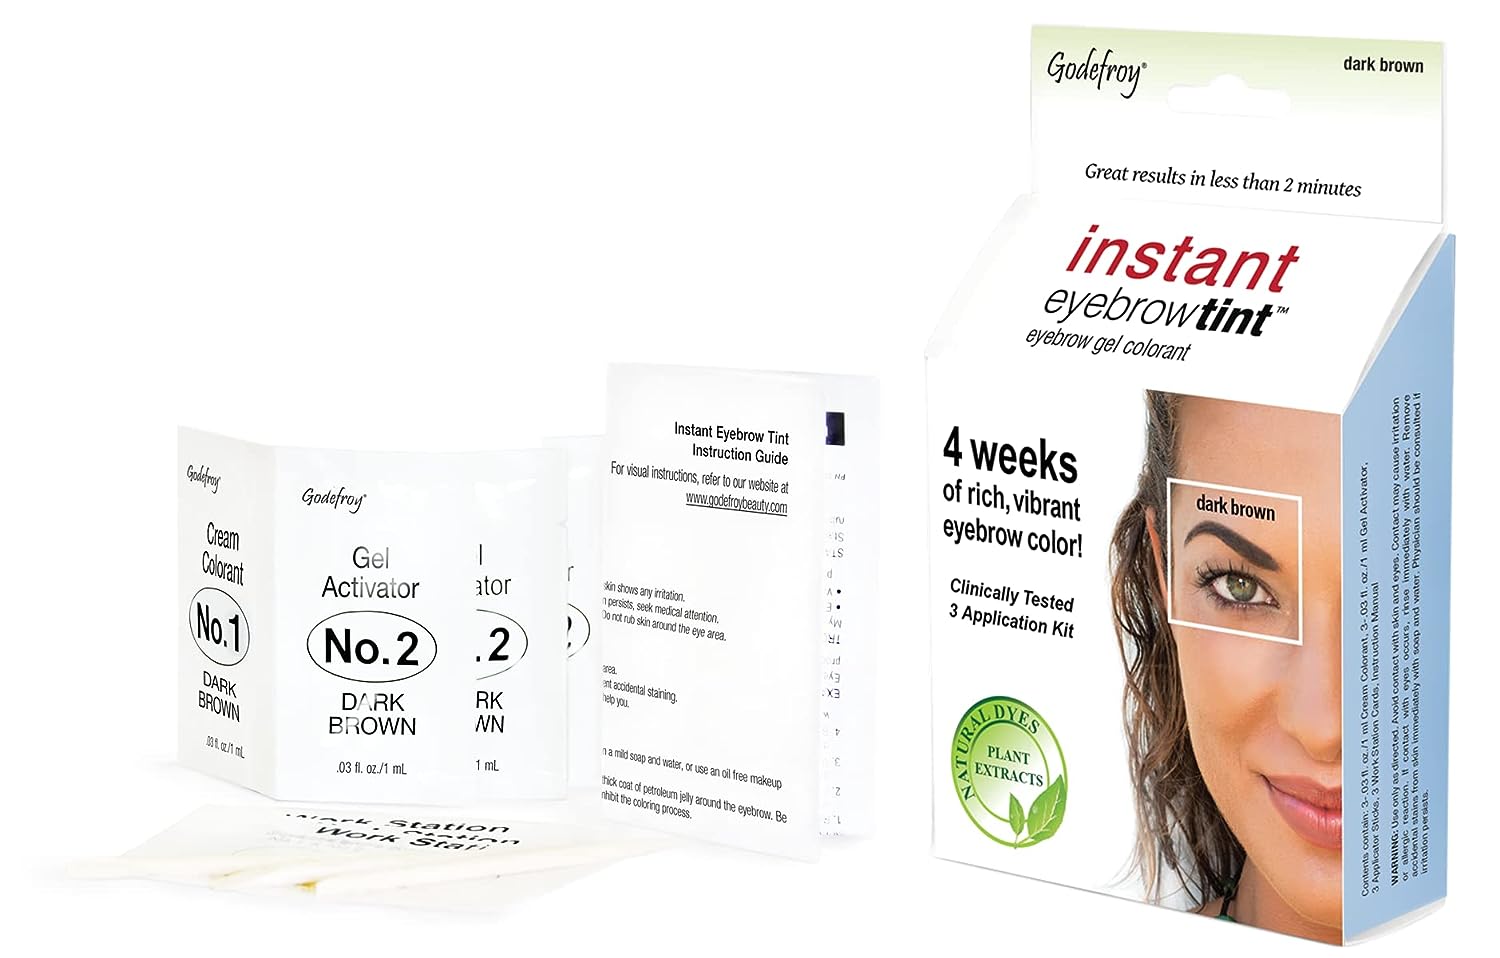 Godefroy Instant Eyebrow Color, Dark Brown, .18 s, 12-weeks of long lasting brow color, 3-applications per kit